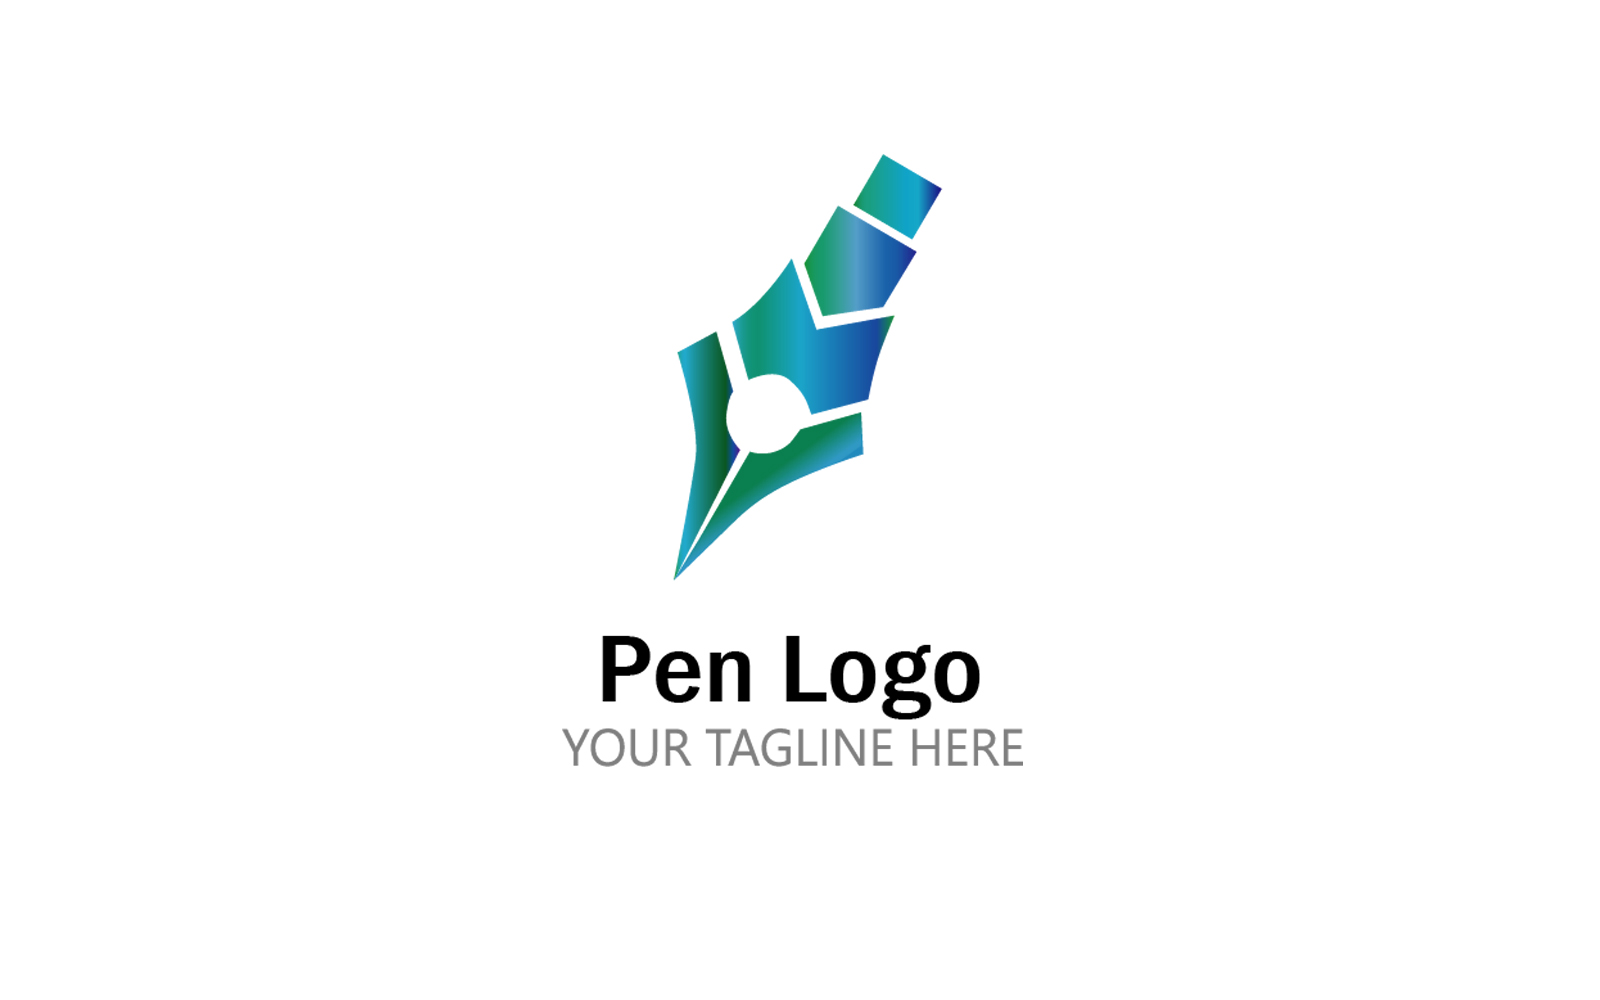 Pen Logo is Used for All Corporate Designs